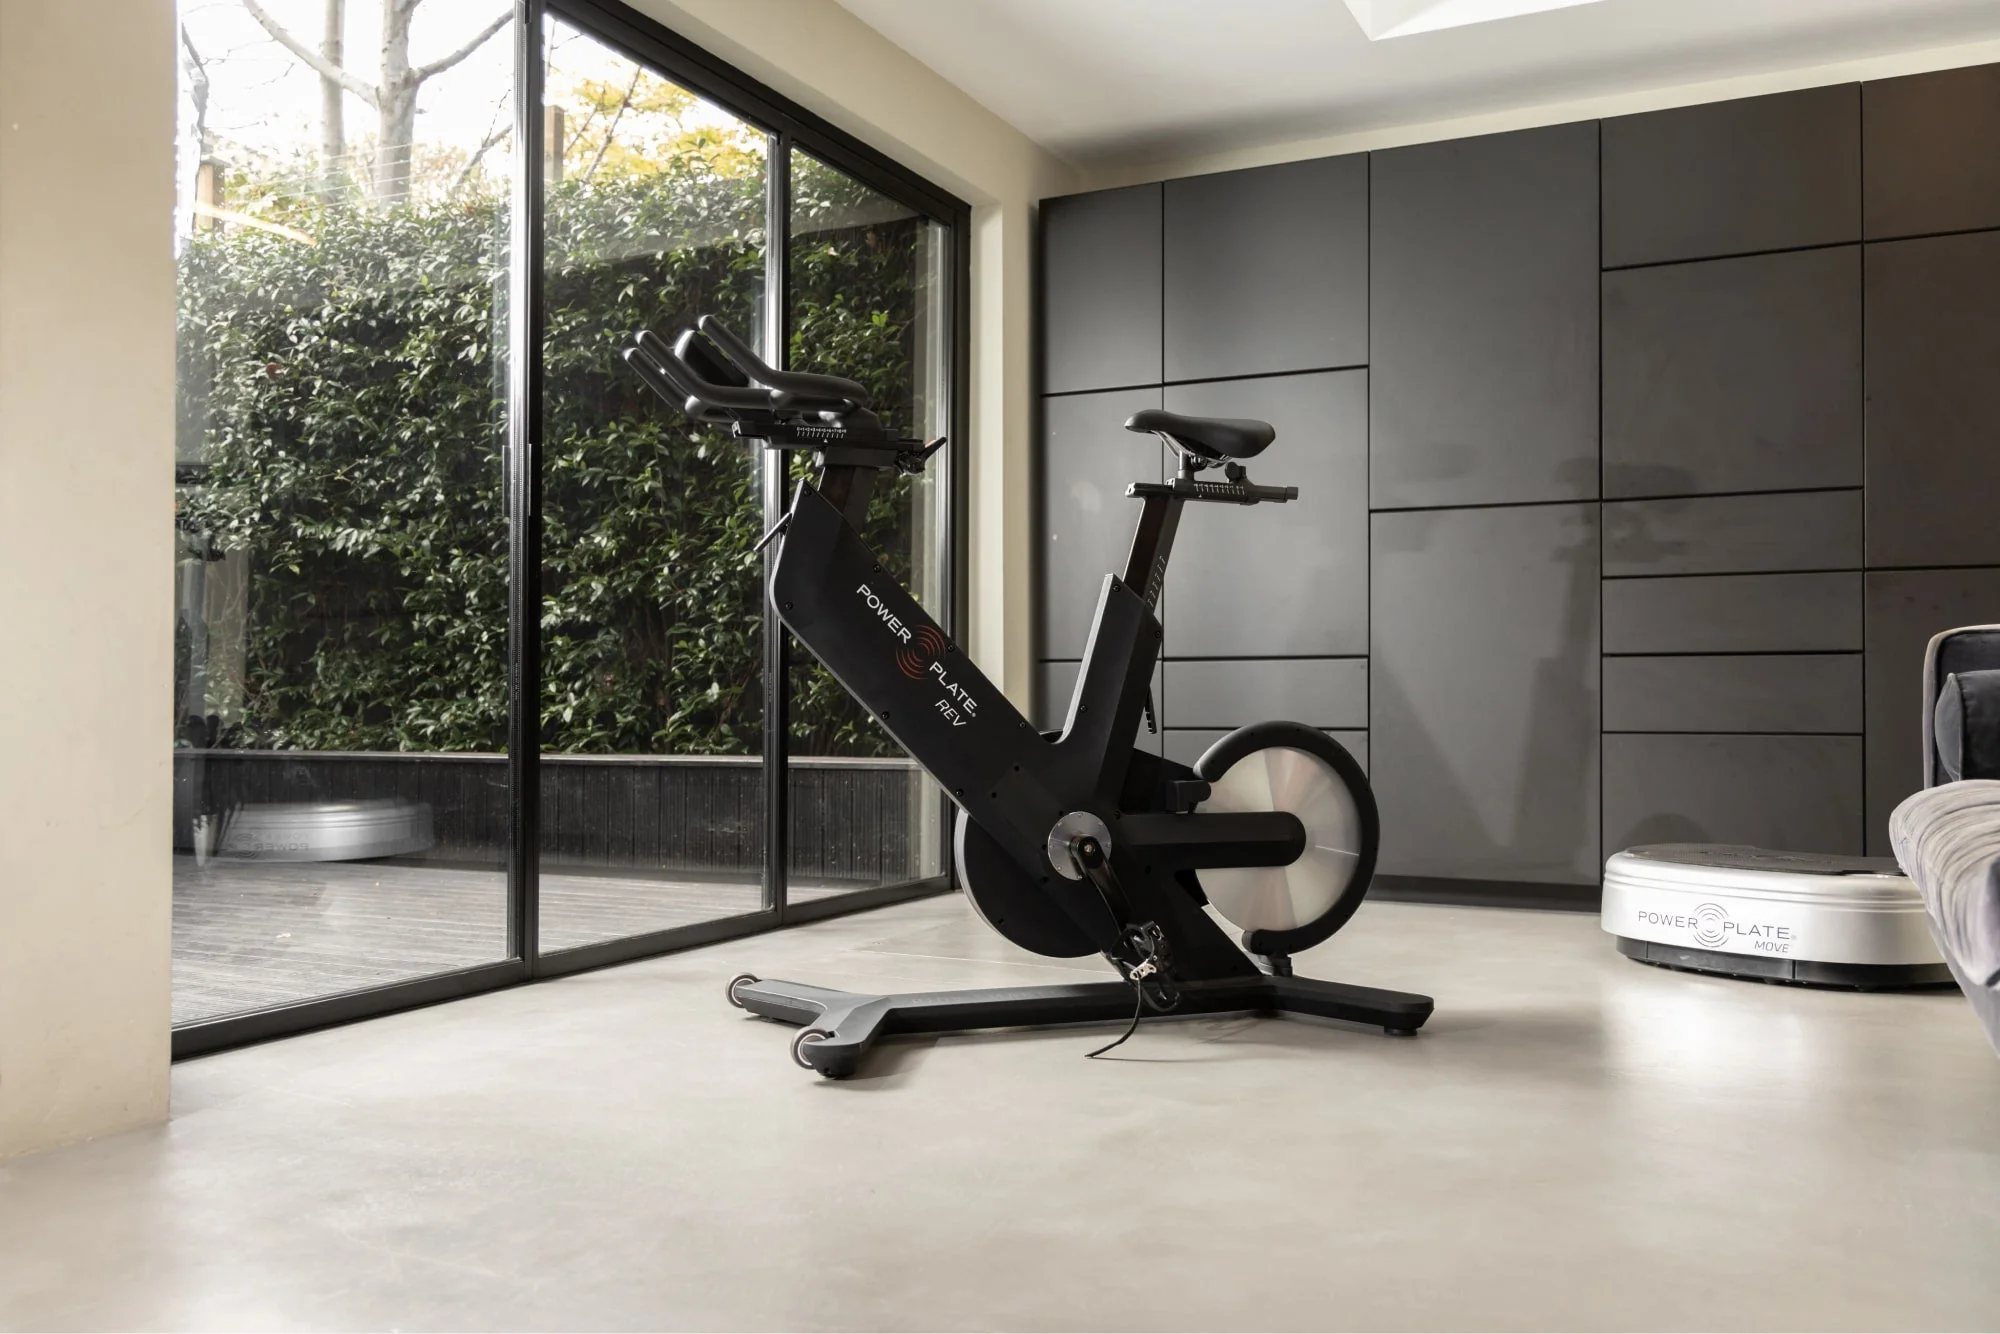 Power Plate Unveils New REV Exercise Bike, Partnership With Life Time